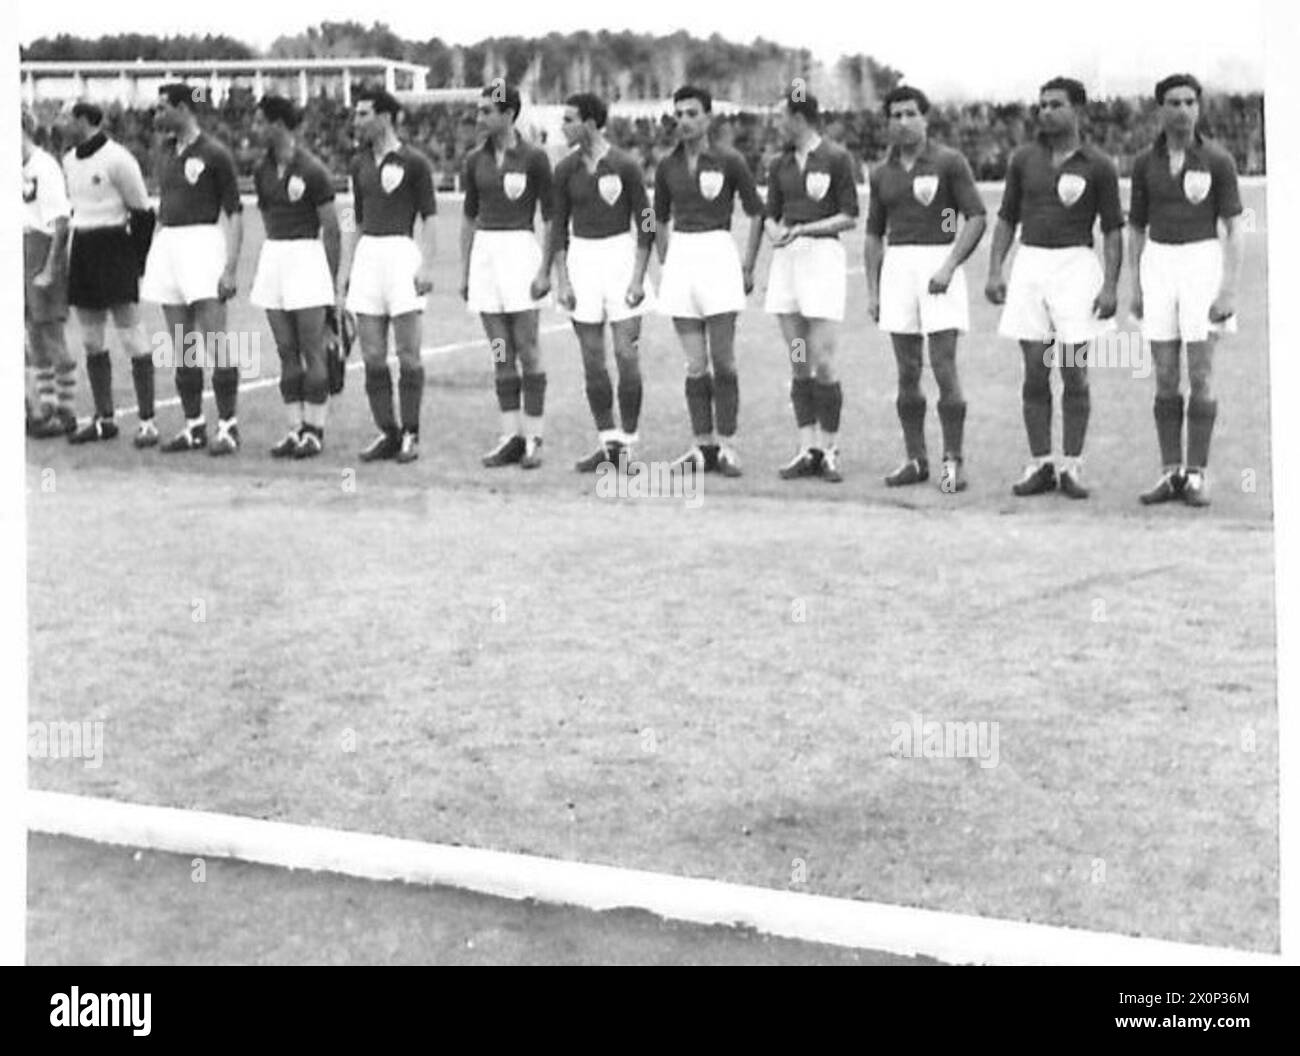 THE POLISH ARMY IN THE MIDDLE EAST, 1942-1943 - The Iranian team lined up before start of the game. The football team of the Polish Army in the East became famous for winning many games. In Iran the team was composed almost exclusively of young men who had not reached an age to be able to play in big teams in Poland. Some of them fought in Tobruk and other parts of the Western Desrt. These pictures show a game between the Polish team and one representing Persia, which caused a great interest and drew large crowds. The final score was 3-1 for the Poles British Army, Polish Army, Polish Armed Fo Stock Photo